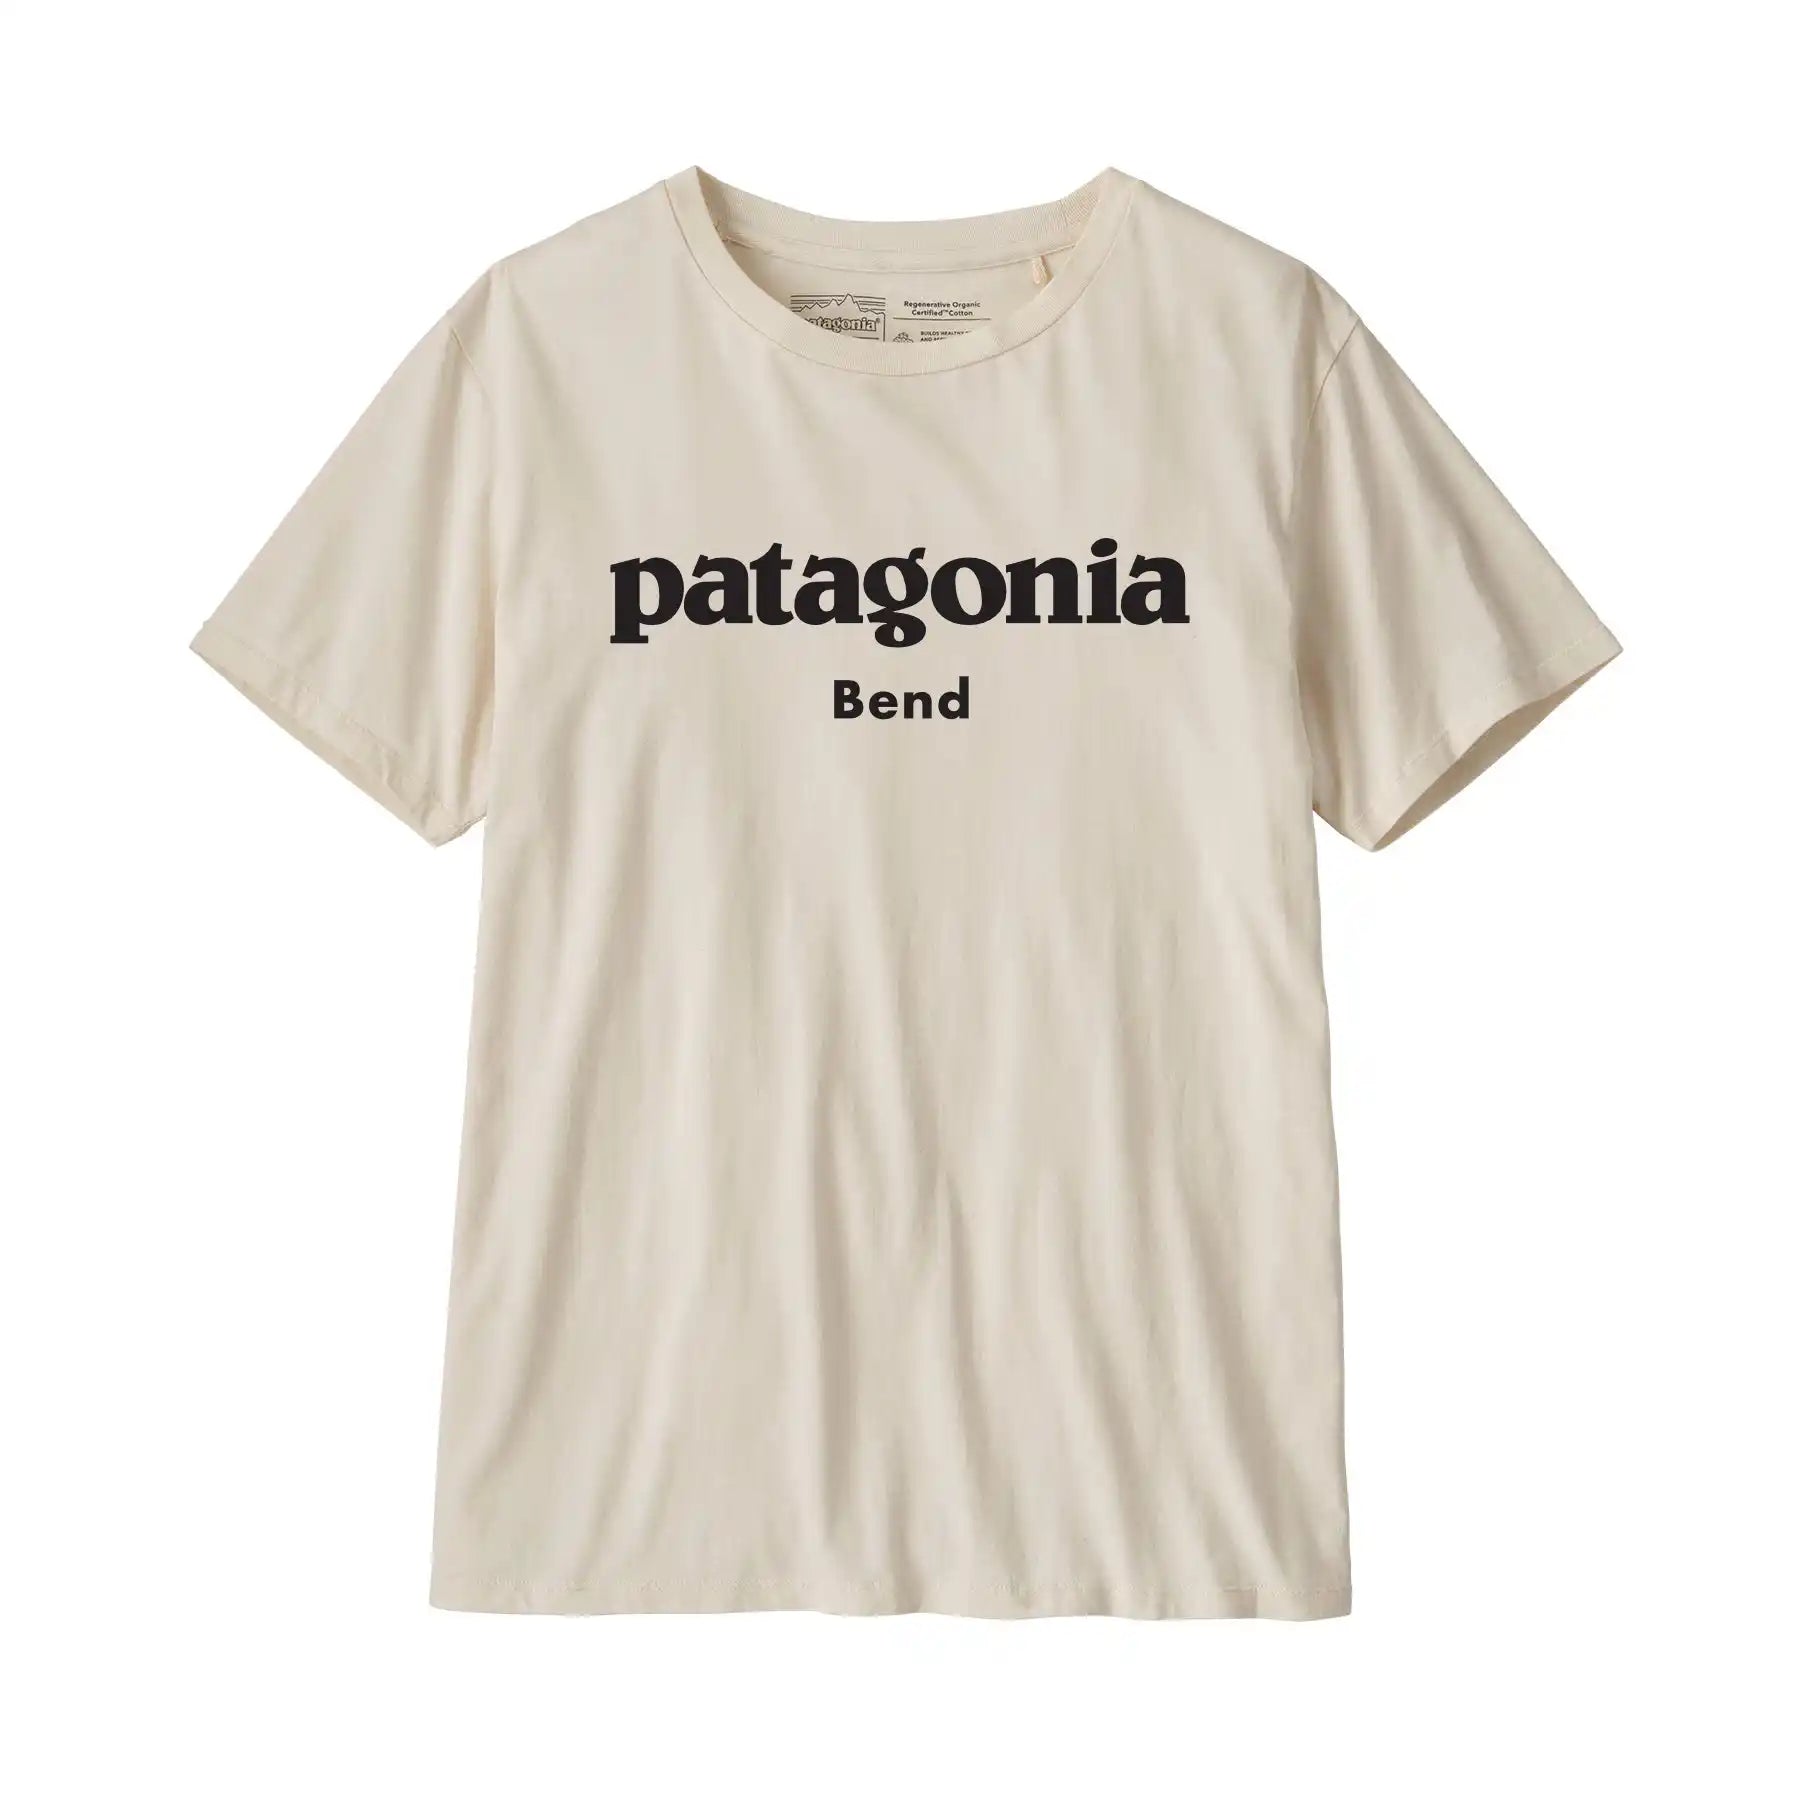 Daily Tee - Patagonia Bend